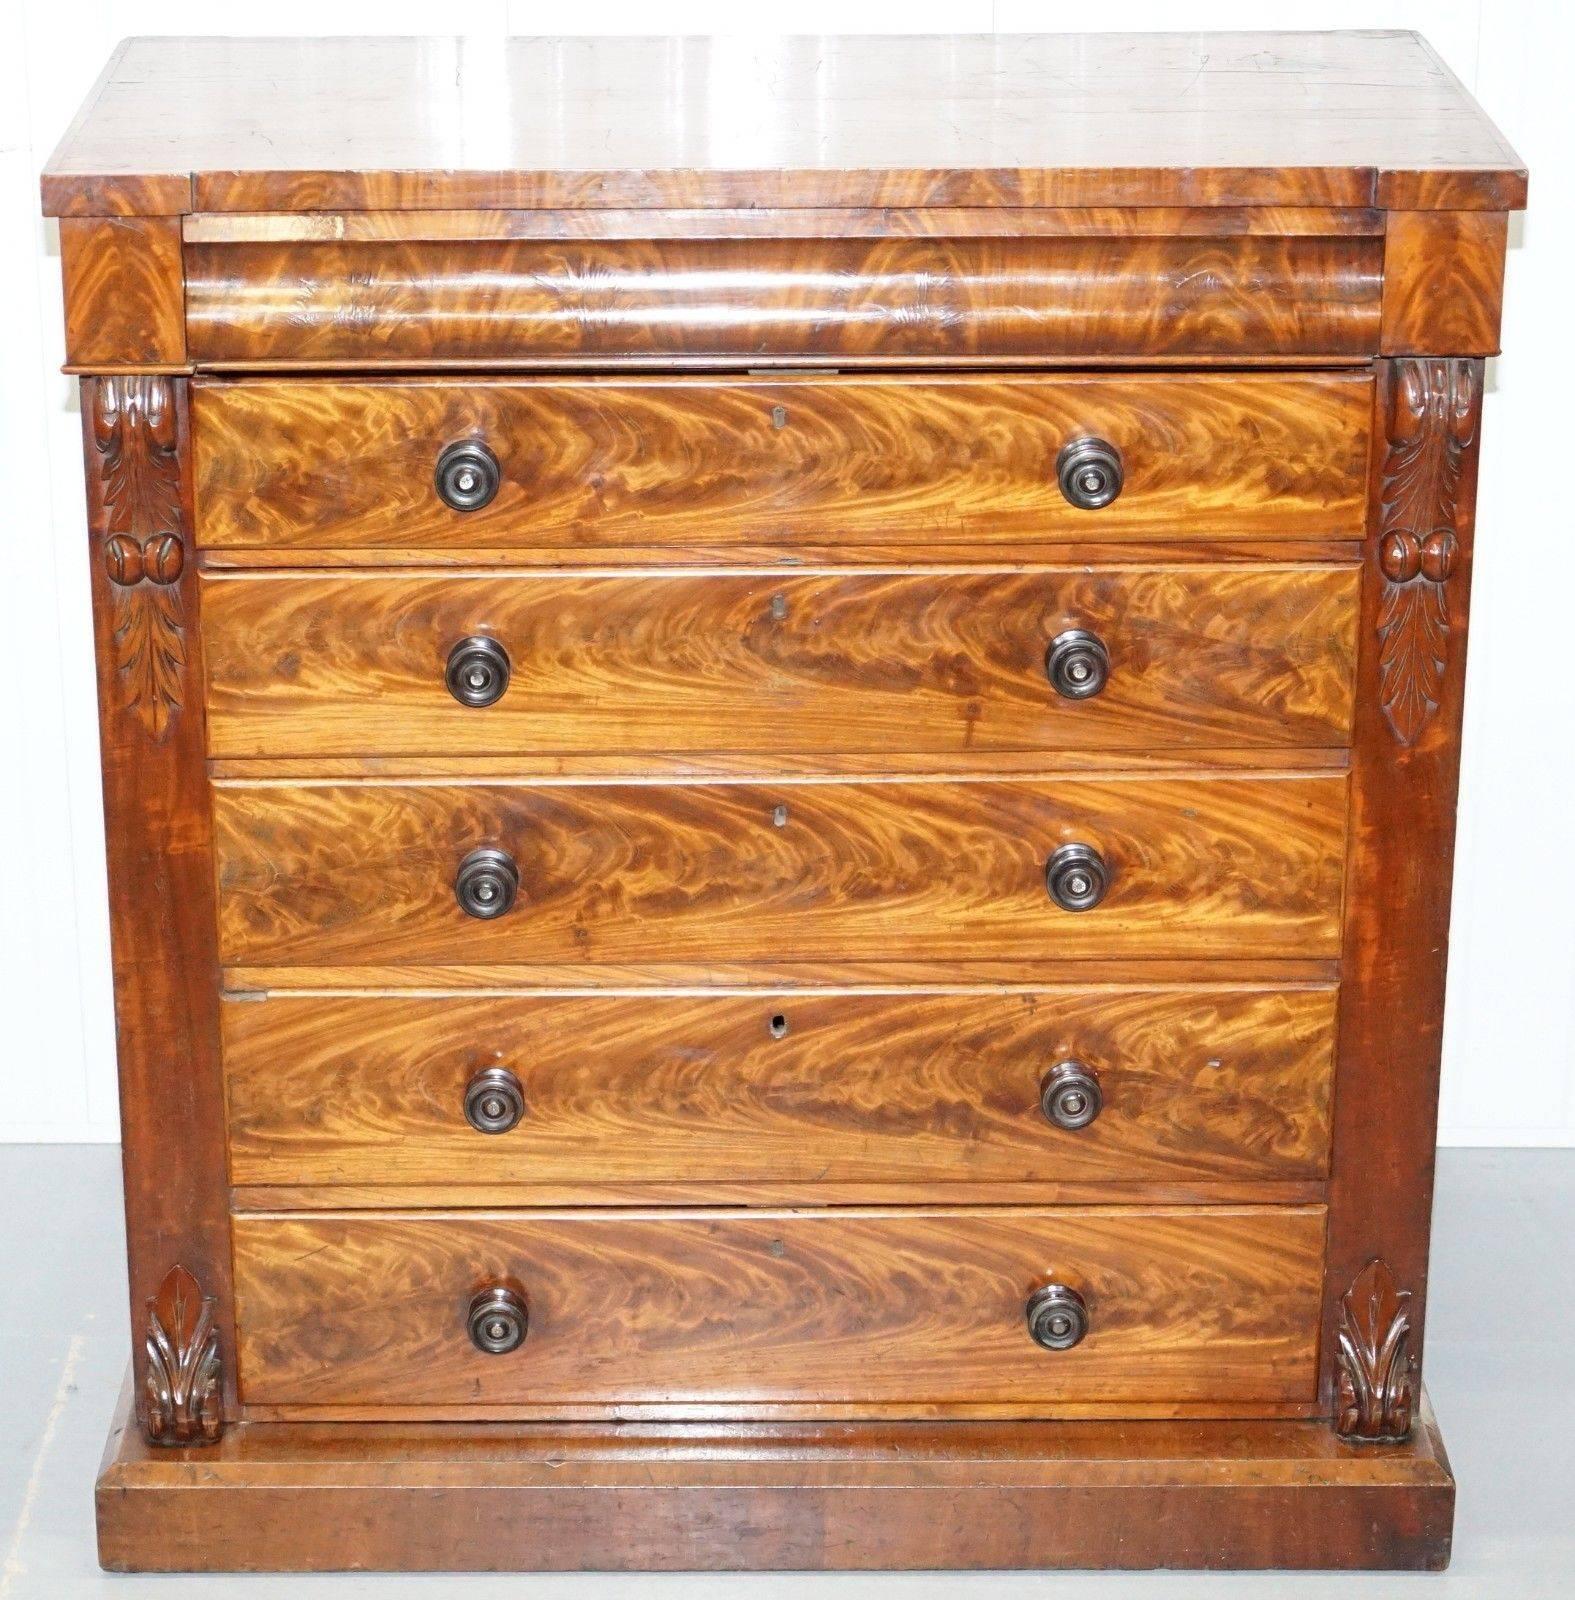 We are delighted to offer for sale this stunning very large flamed mahogany chest of drawers

A very grand and well-made piece, the flamed mahogany cuts are absolutely stunning, if gorgeous timber patina is your thing then these are the drawers